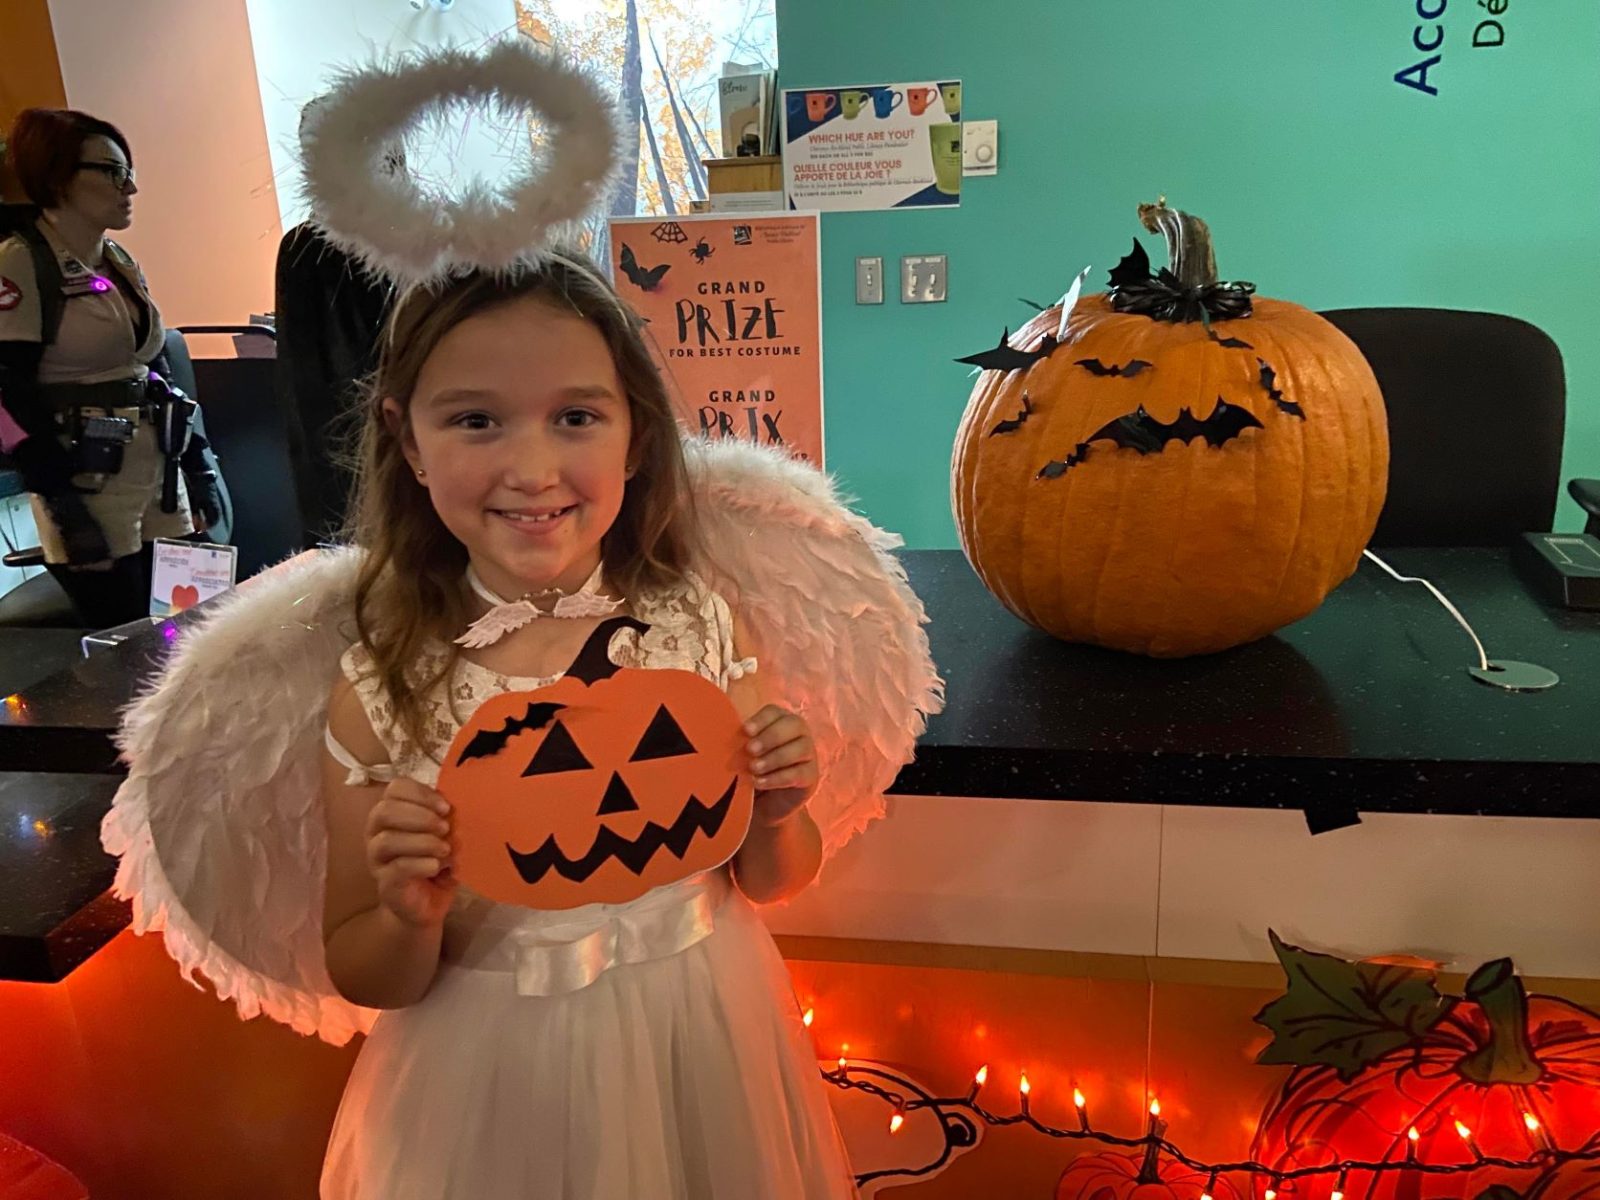 Halloween fun returns to the library